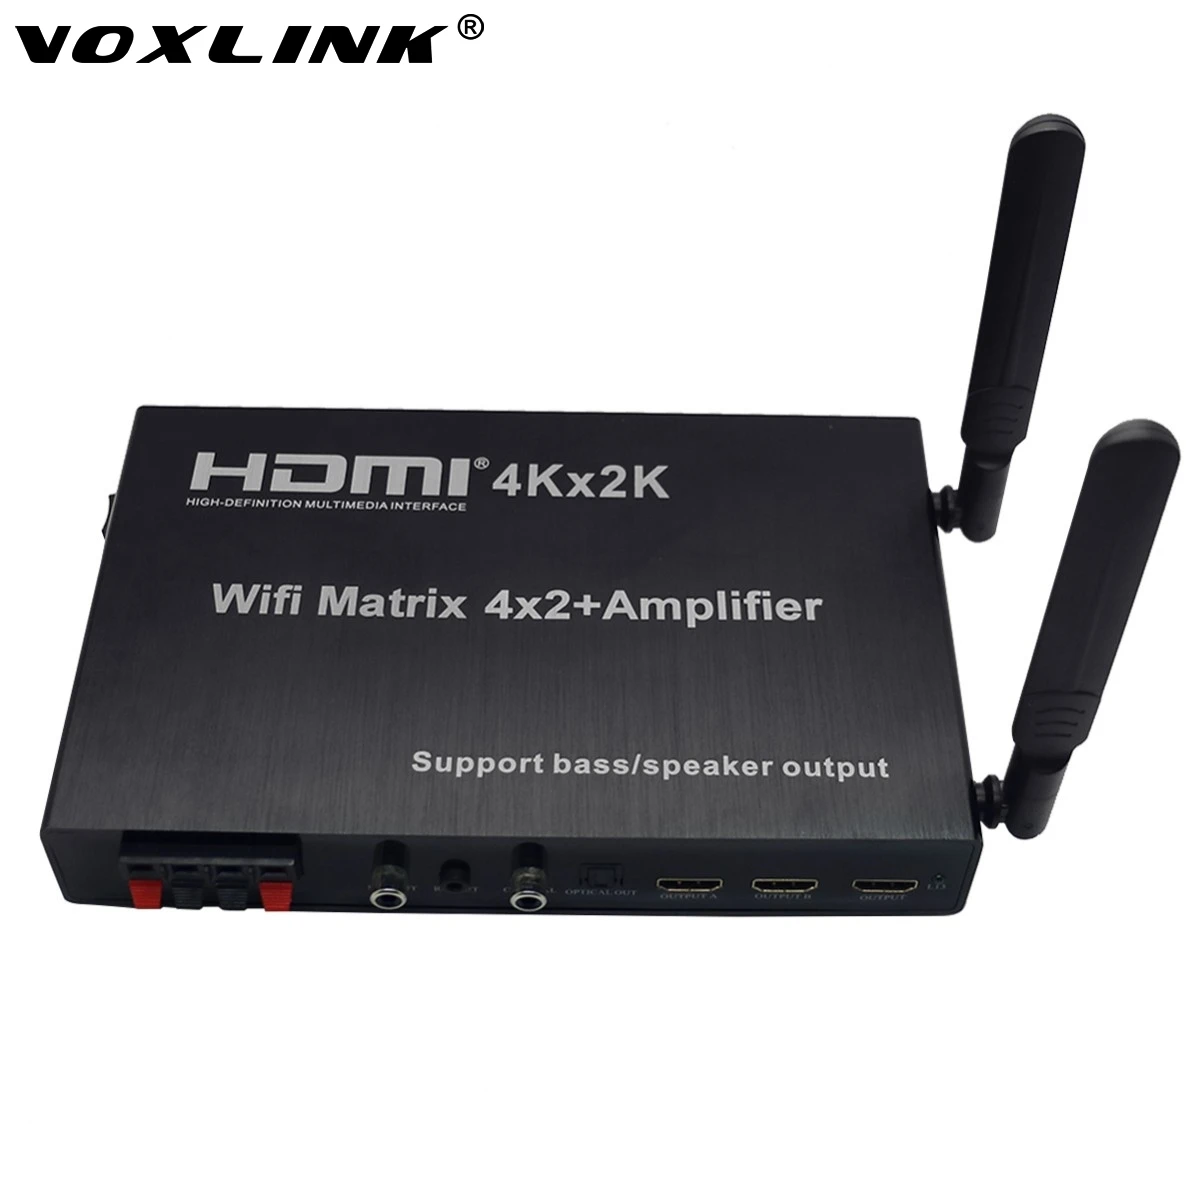 VOXLINK 4K Wifi HDMI Matrix 4x2 + Amplifier 1080P 4 Port HDMI Switcher Splitter Support Wifi Airplay miracast For IOS Android